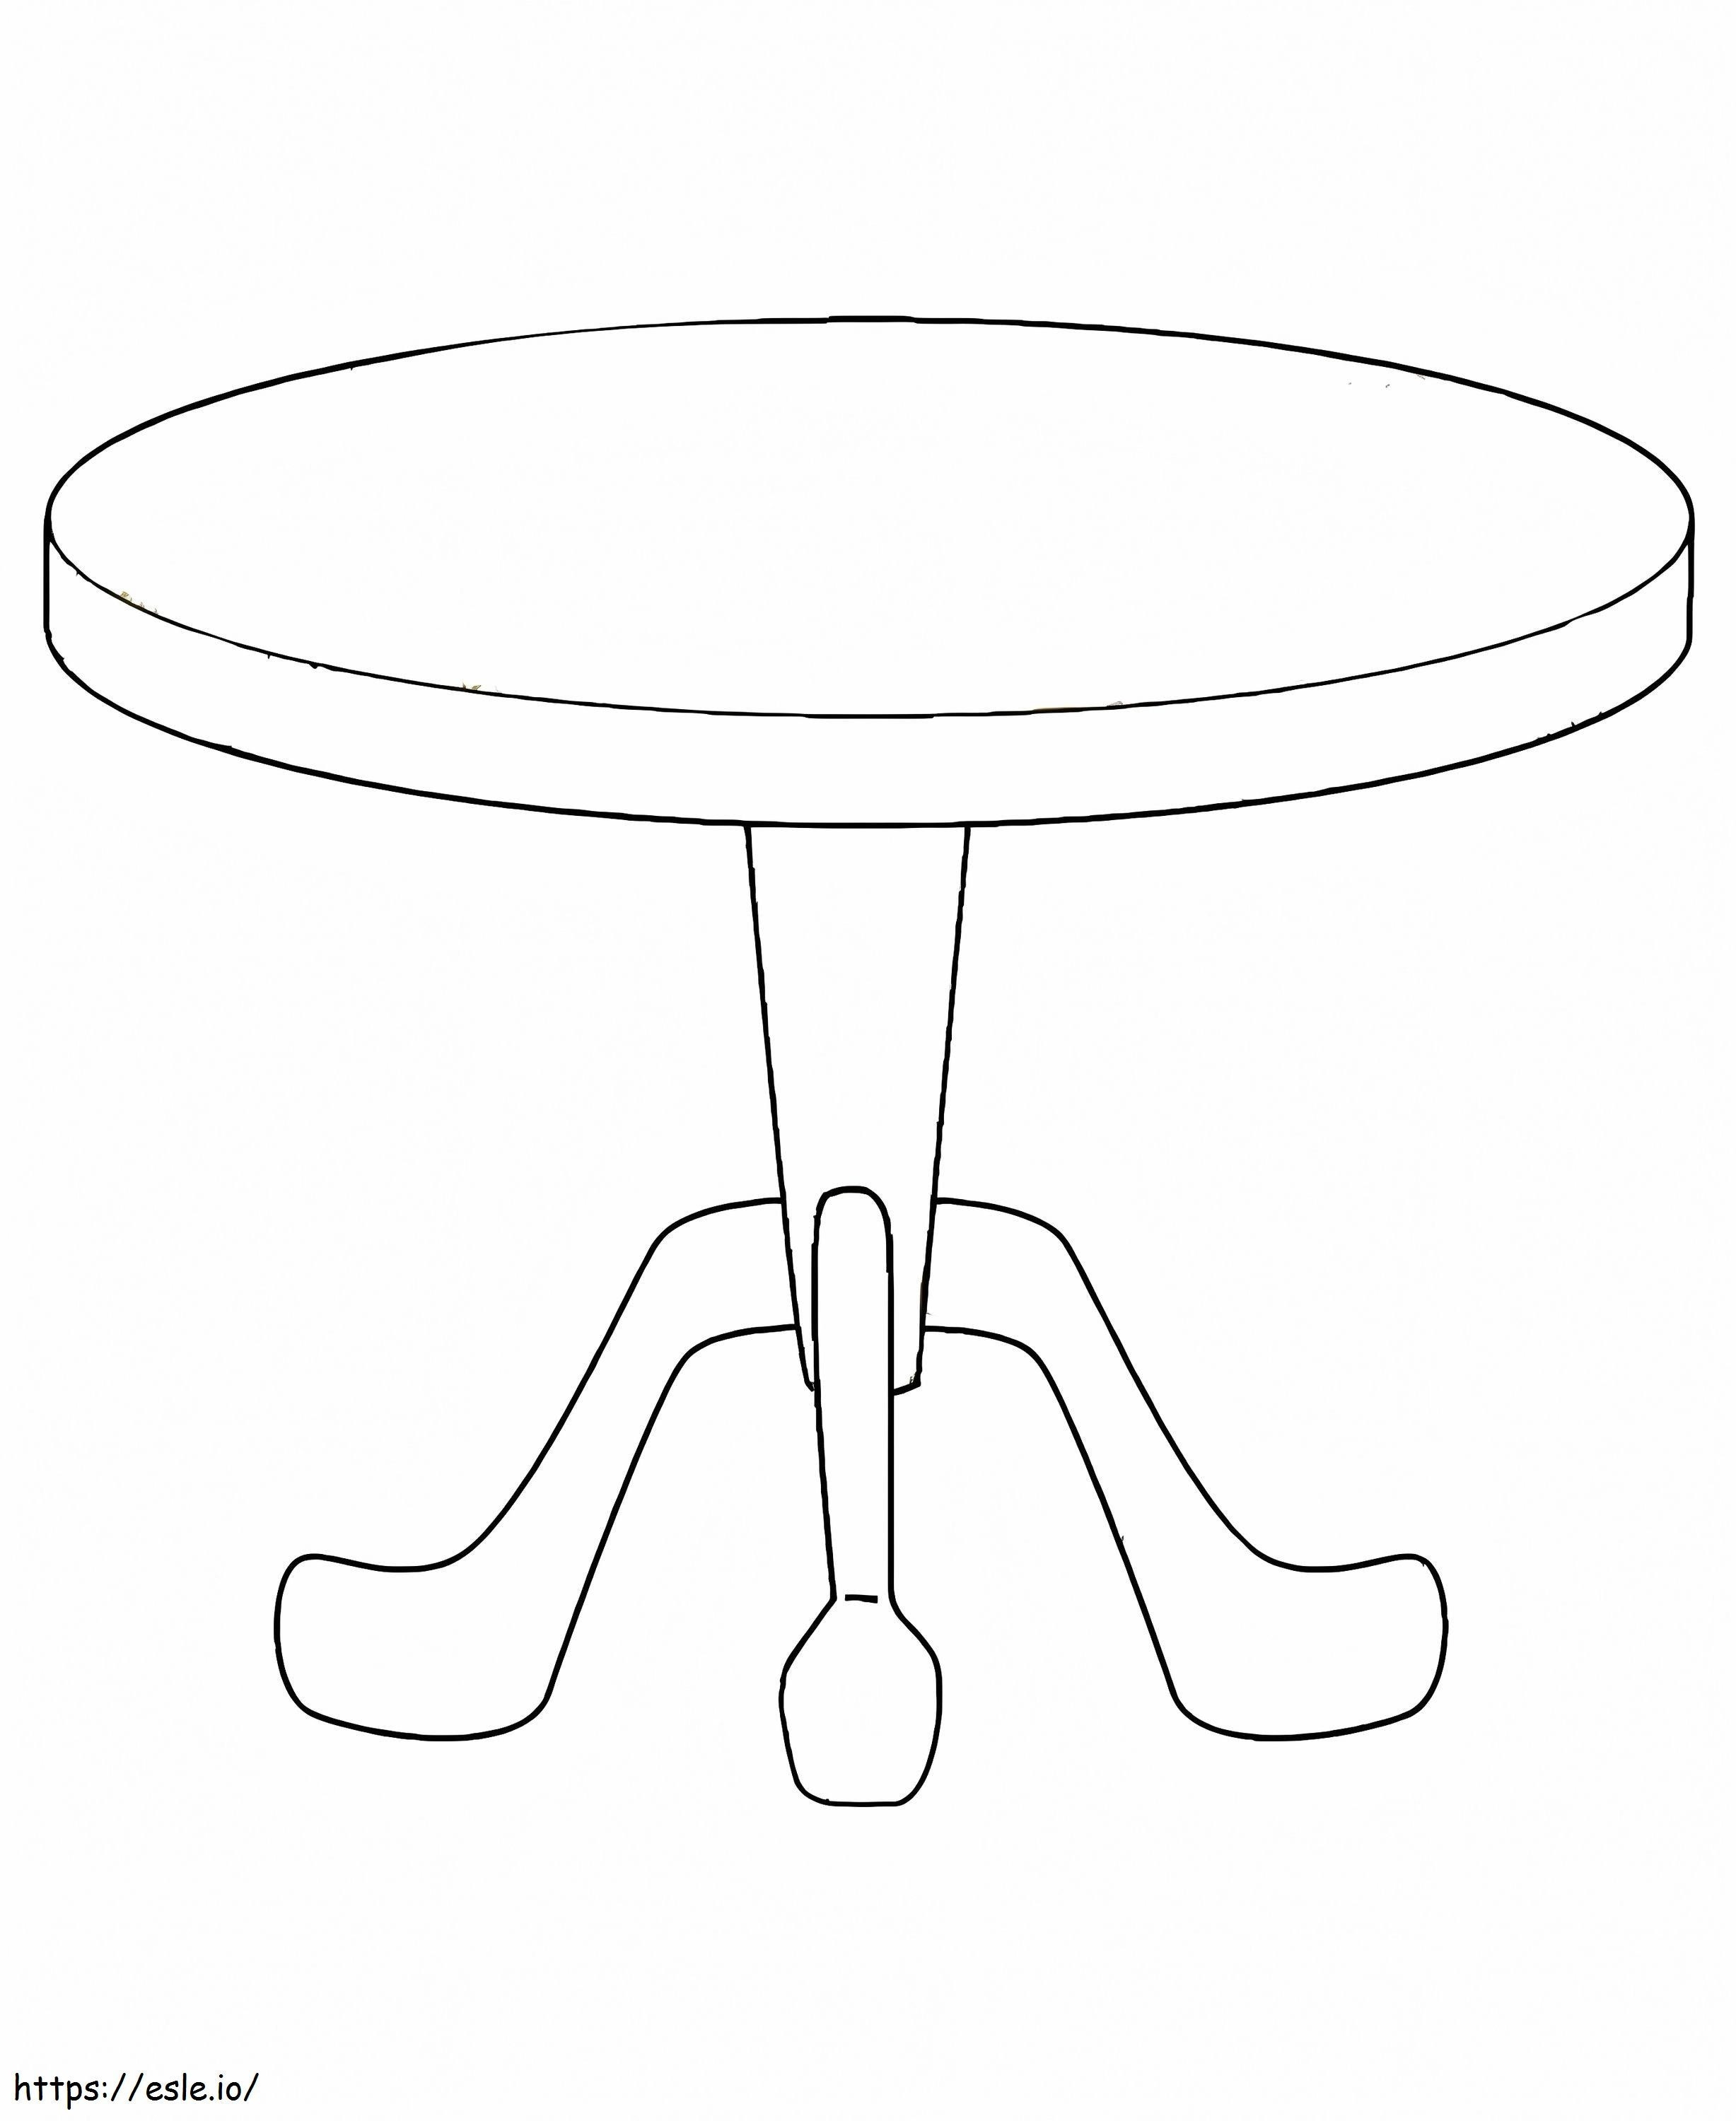 Simple Round Table coloring page